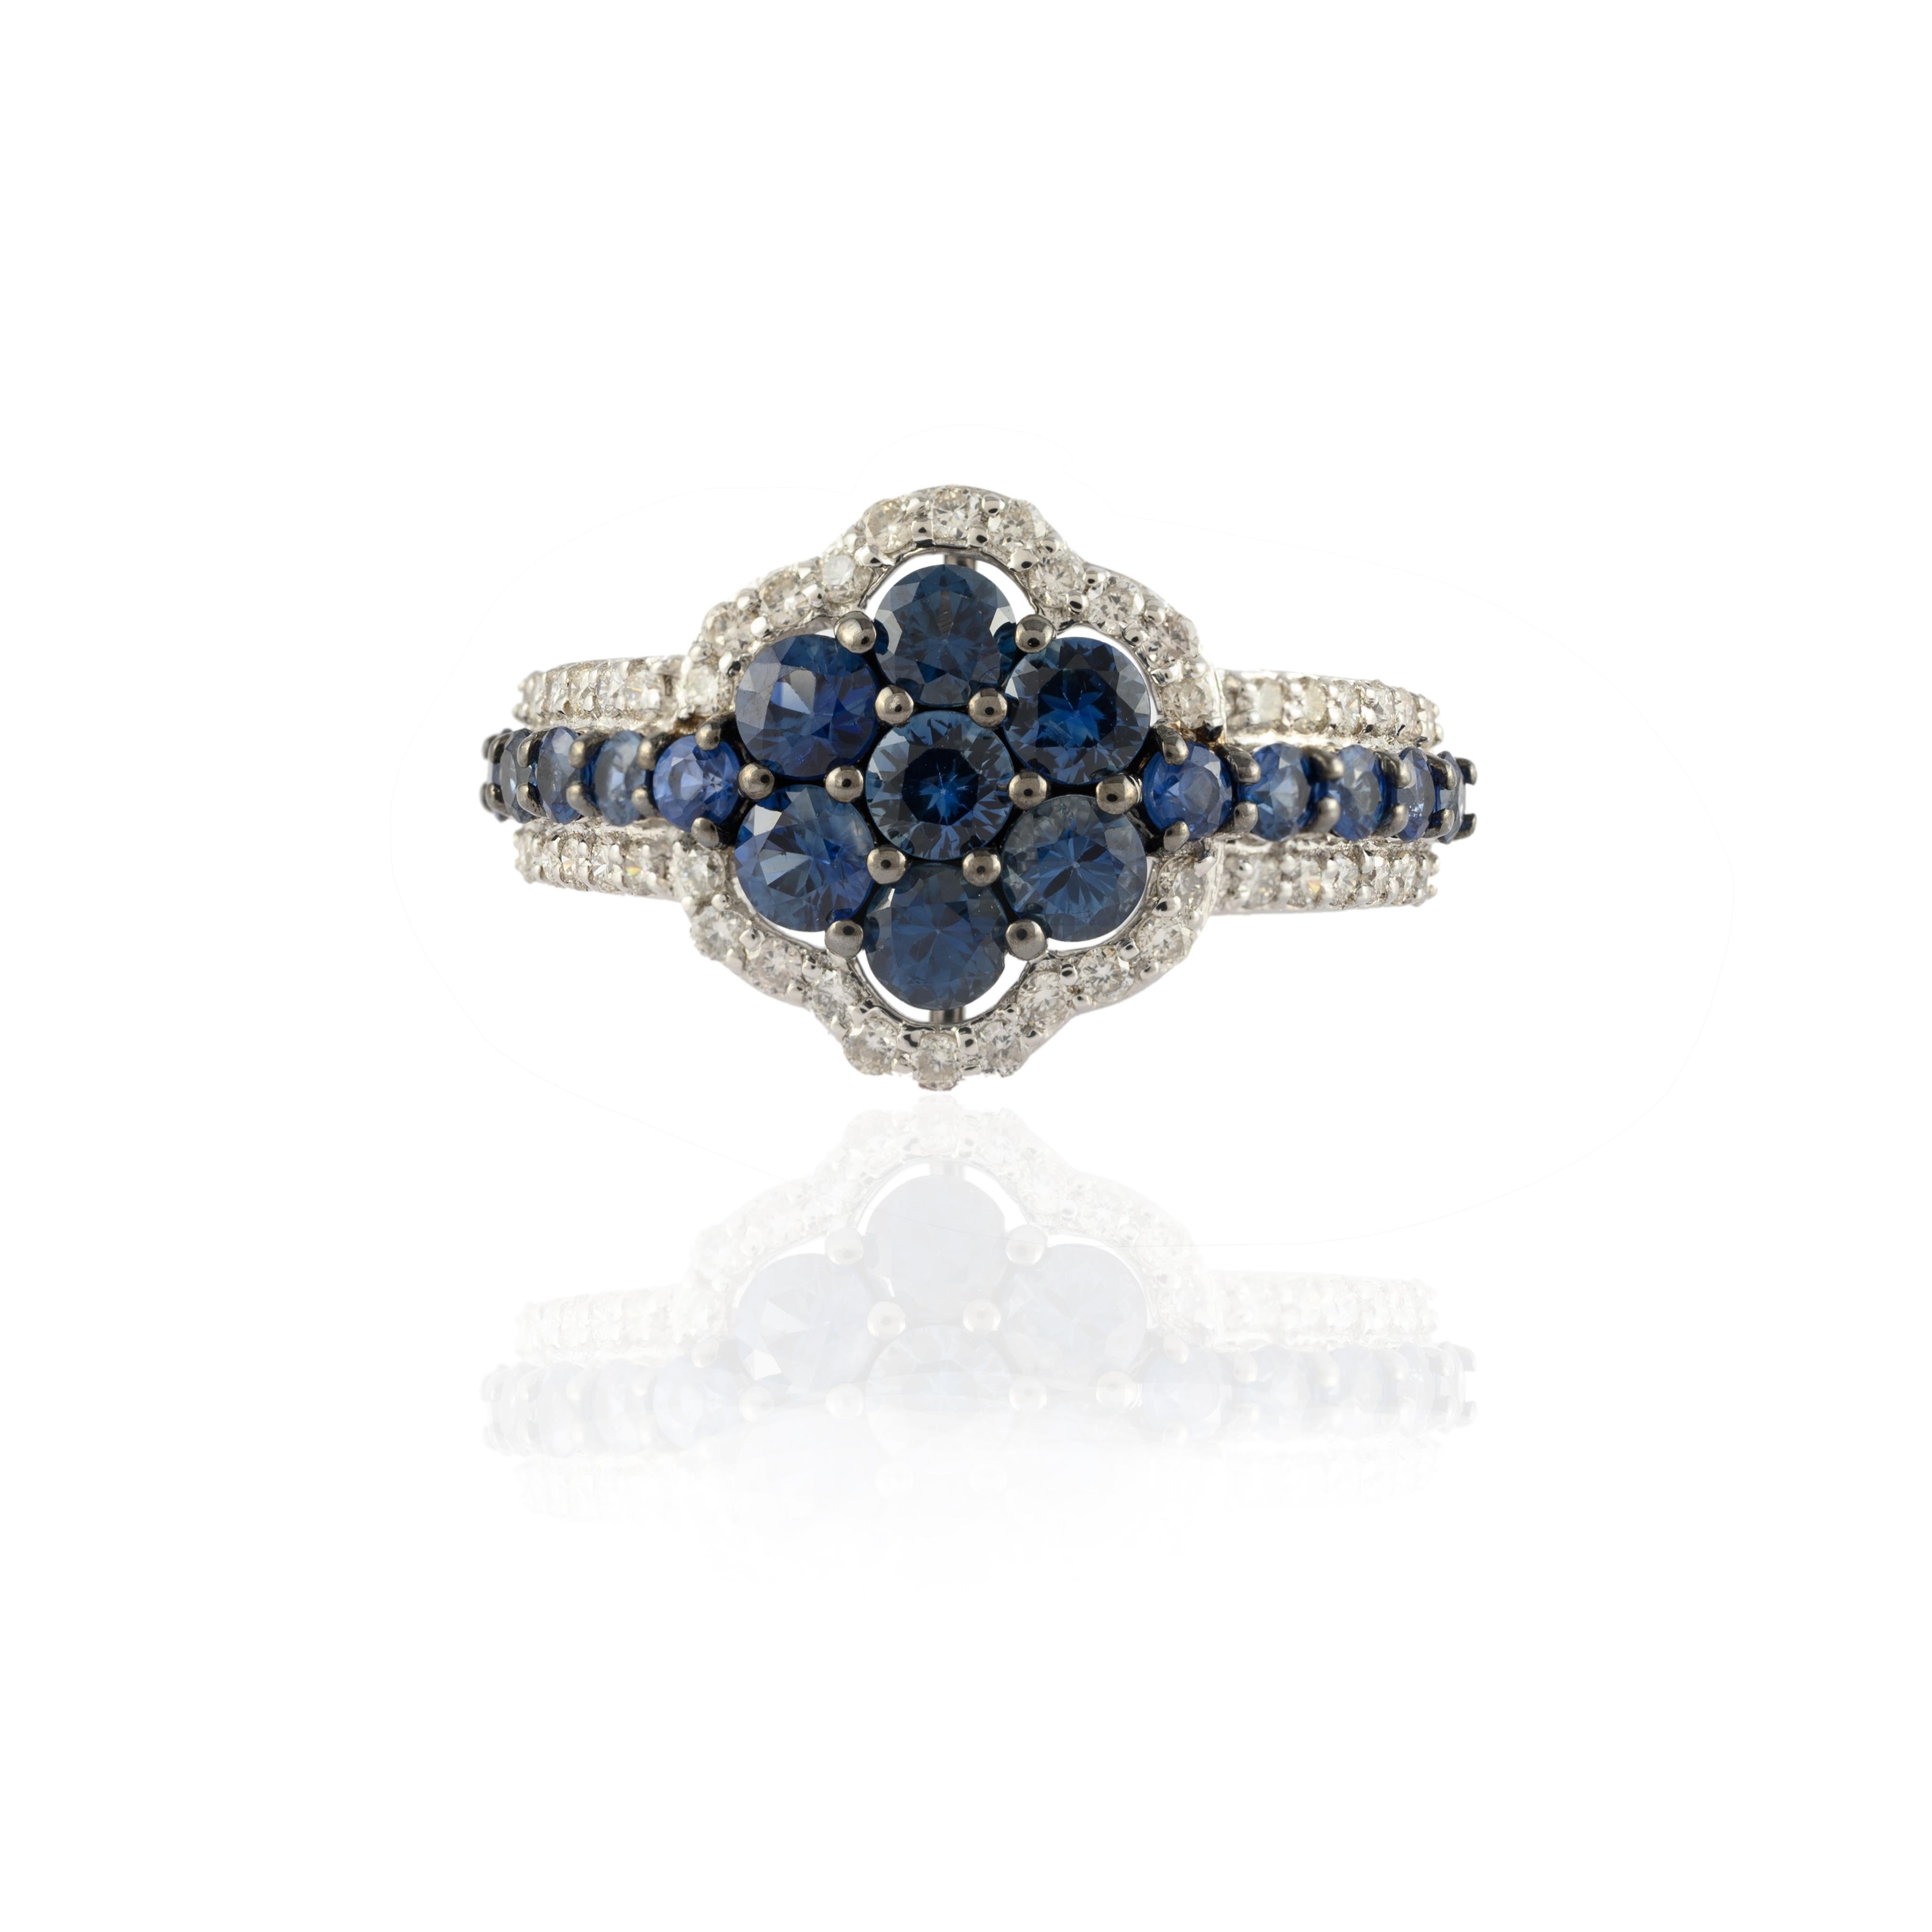 For Sale:  Unique Blue Sapphire Floral Ring with Diamonds in 14k Solid White Gold 2